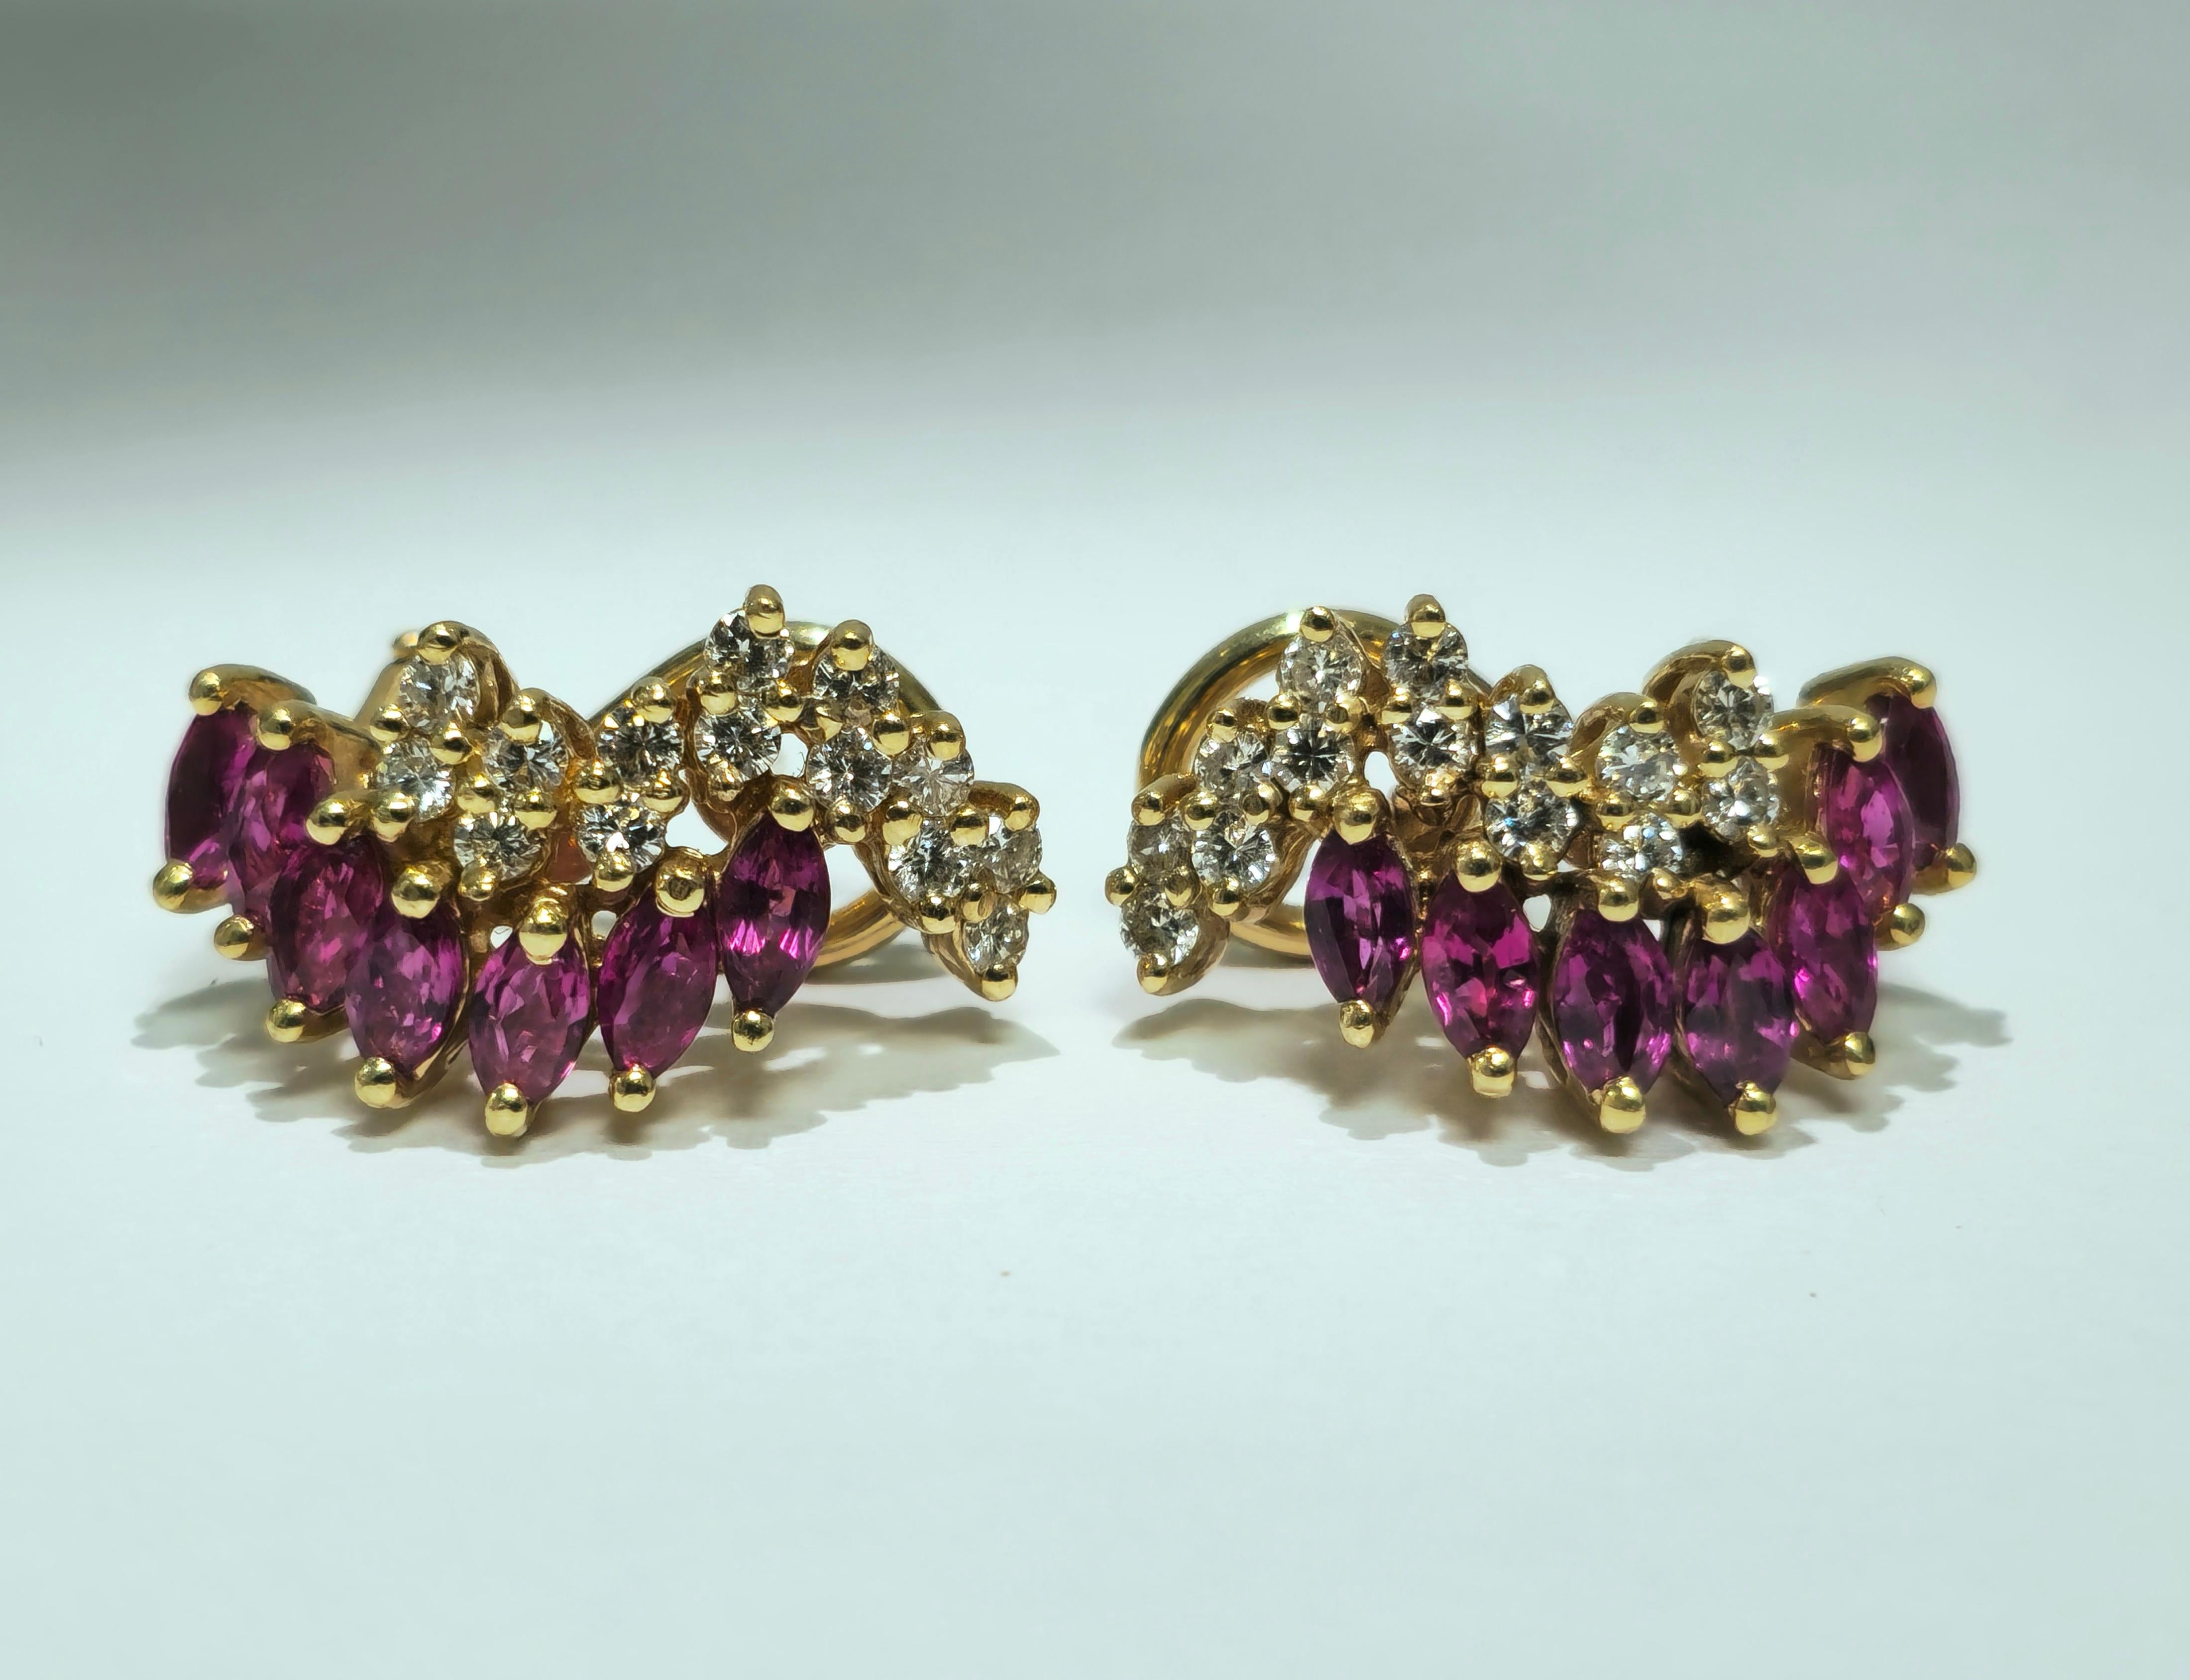 Indulge in elegance and sophistication with our exquisite Ladies Ruby and Diamond Earrings. Crafted from lustrous yellow gold, these earrings feature brilliant diamonds with clarity and color that dazzle in the light. Adorned with a stunning ruby,